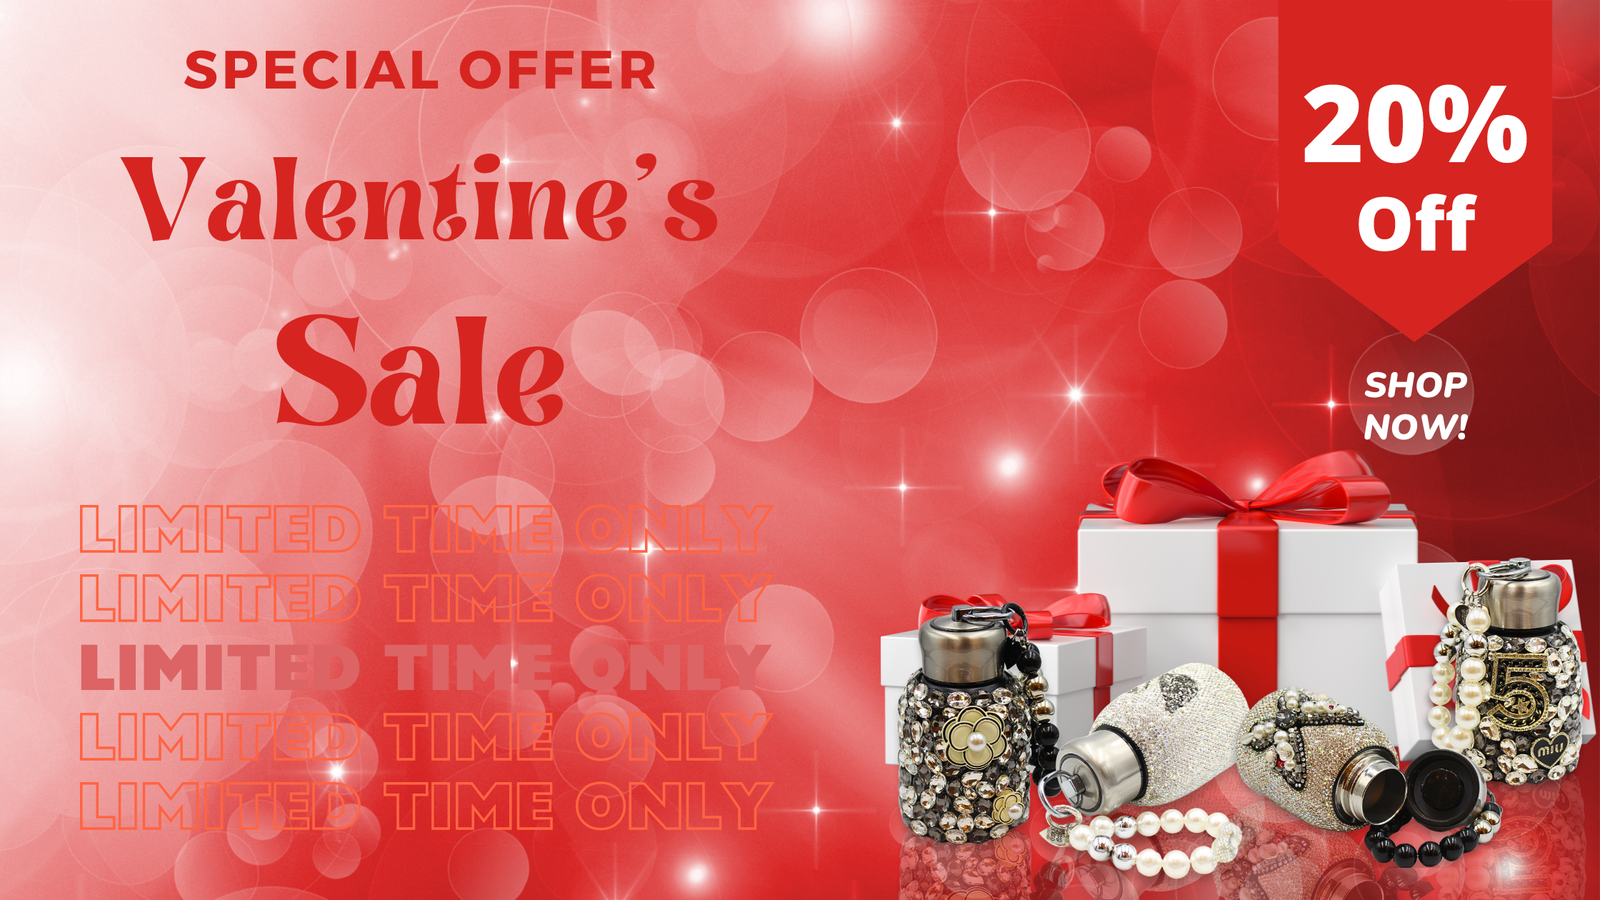 The Perfect Valentine's Day Gift at 20% Off